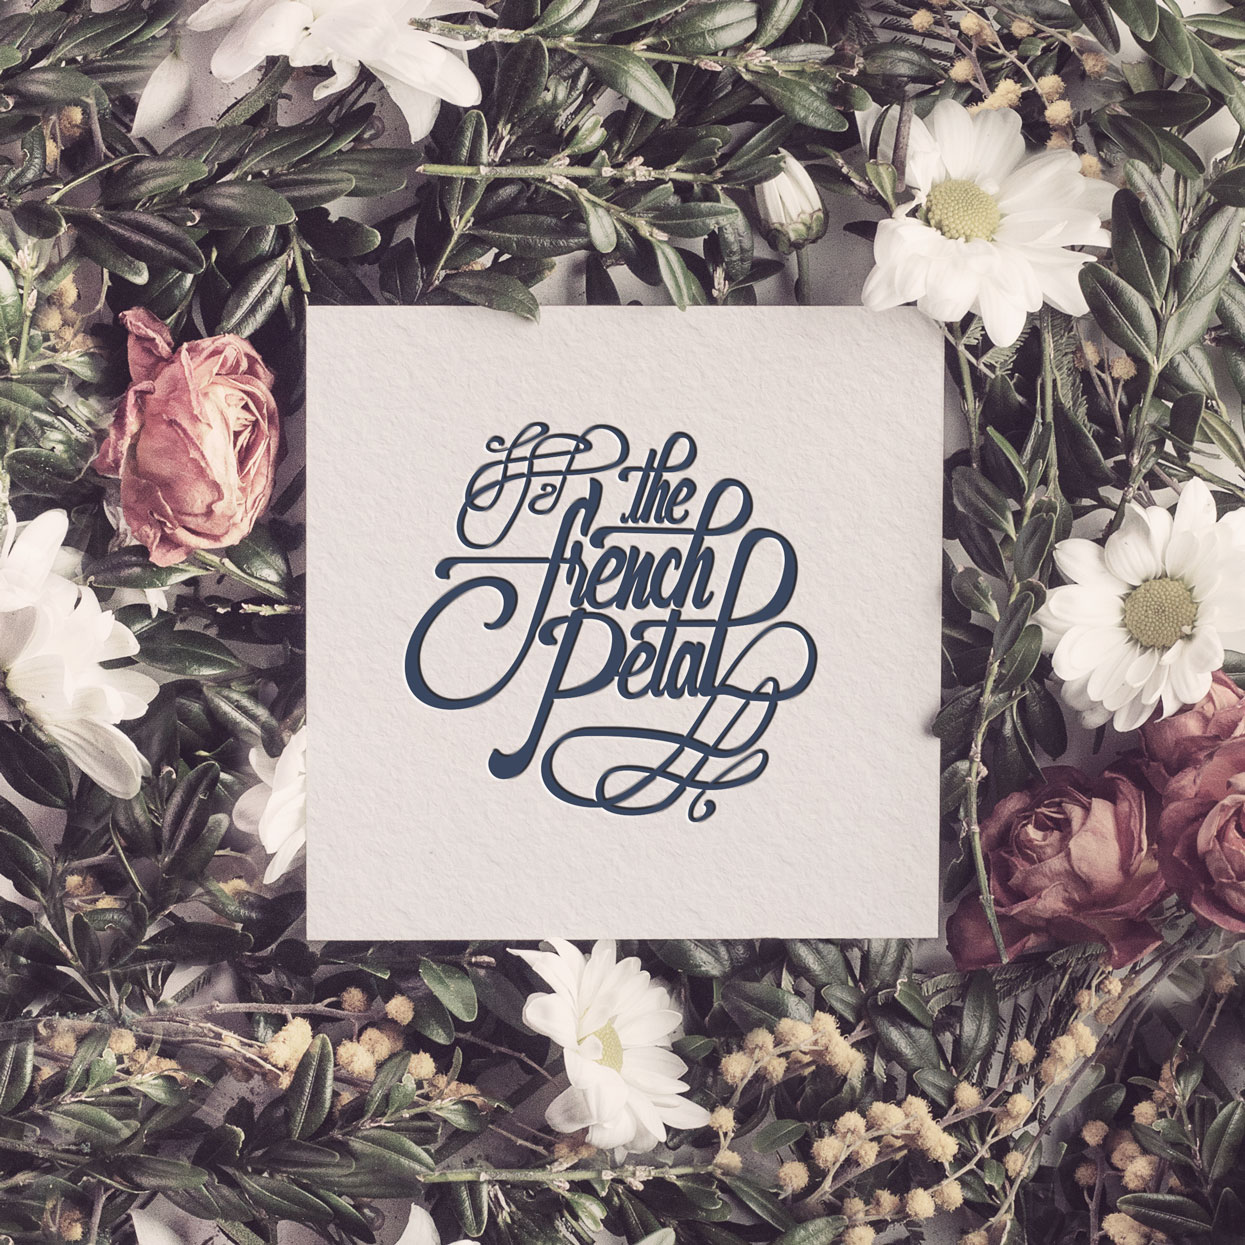 Art Direction and Branding for the florist The French Petal. By Pacifica agency in Byron Bay.